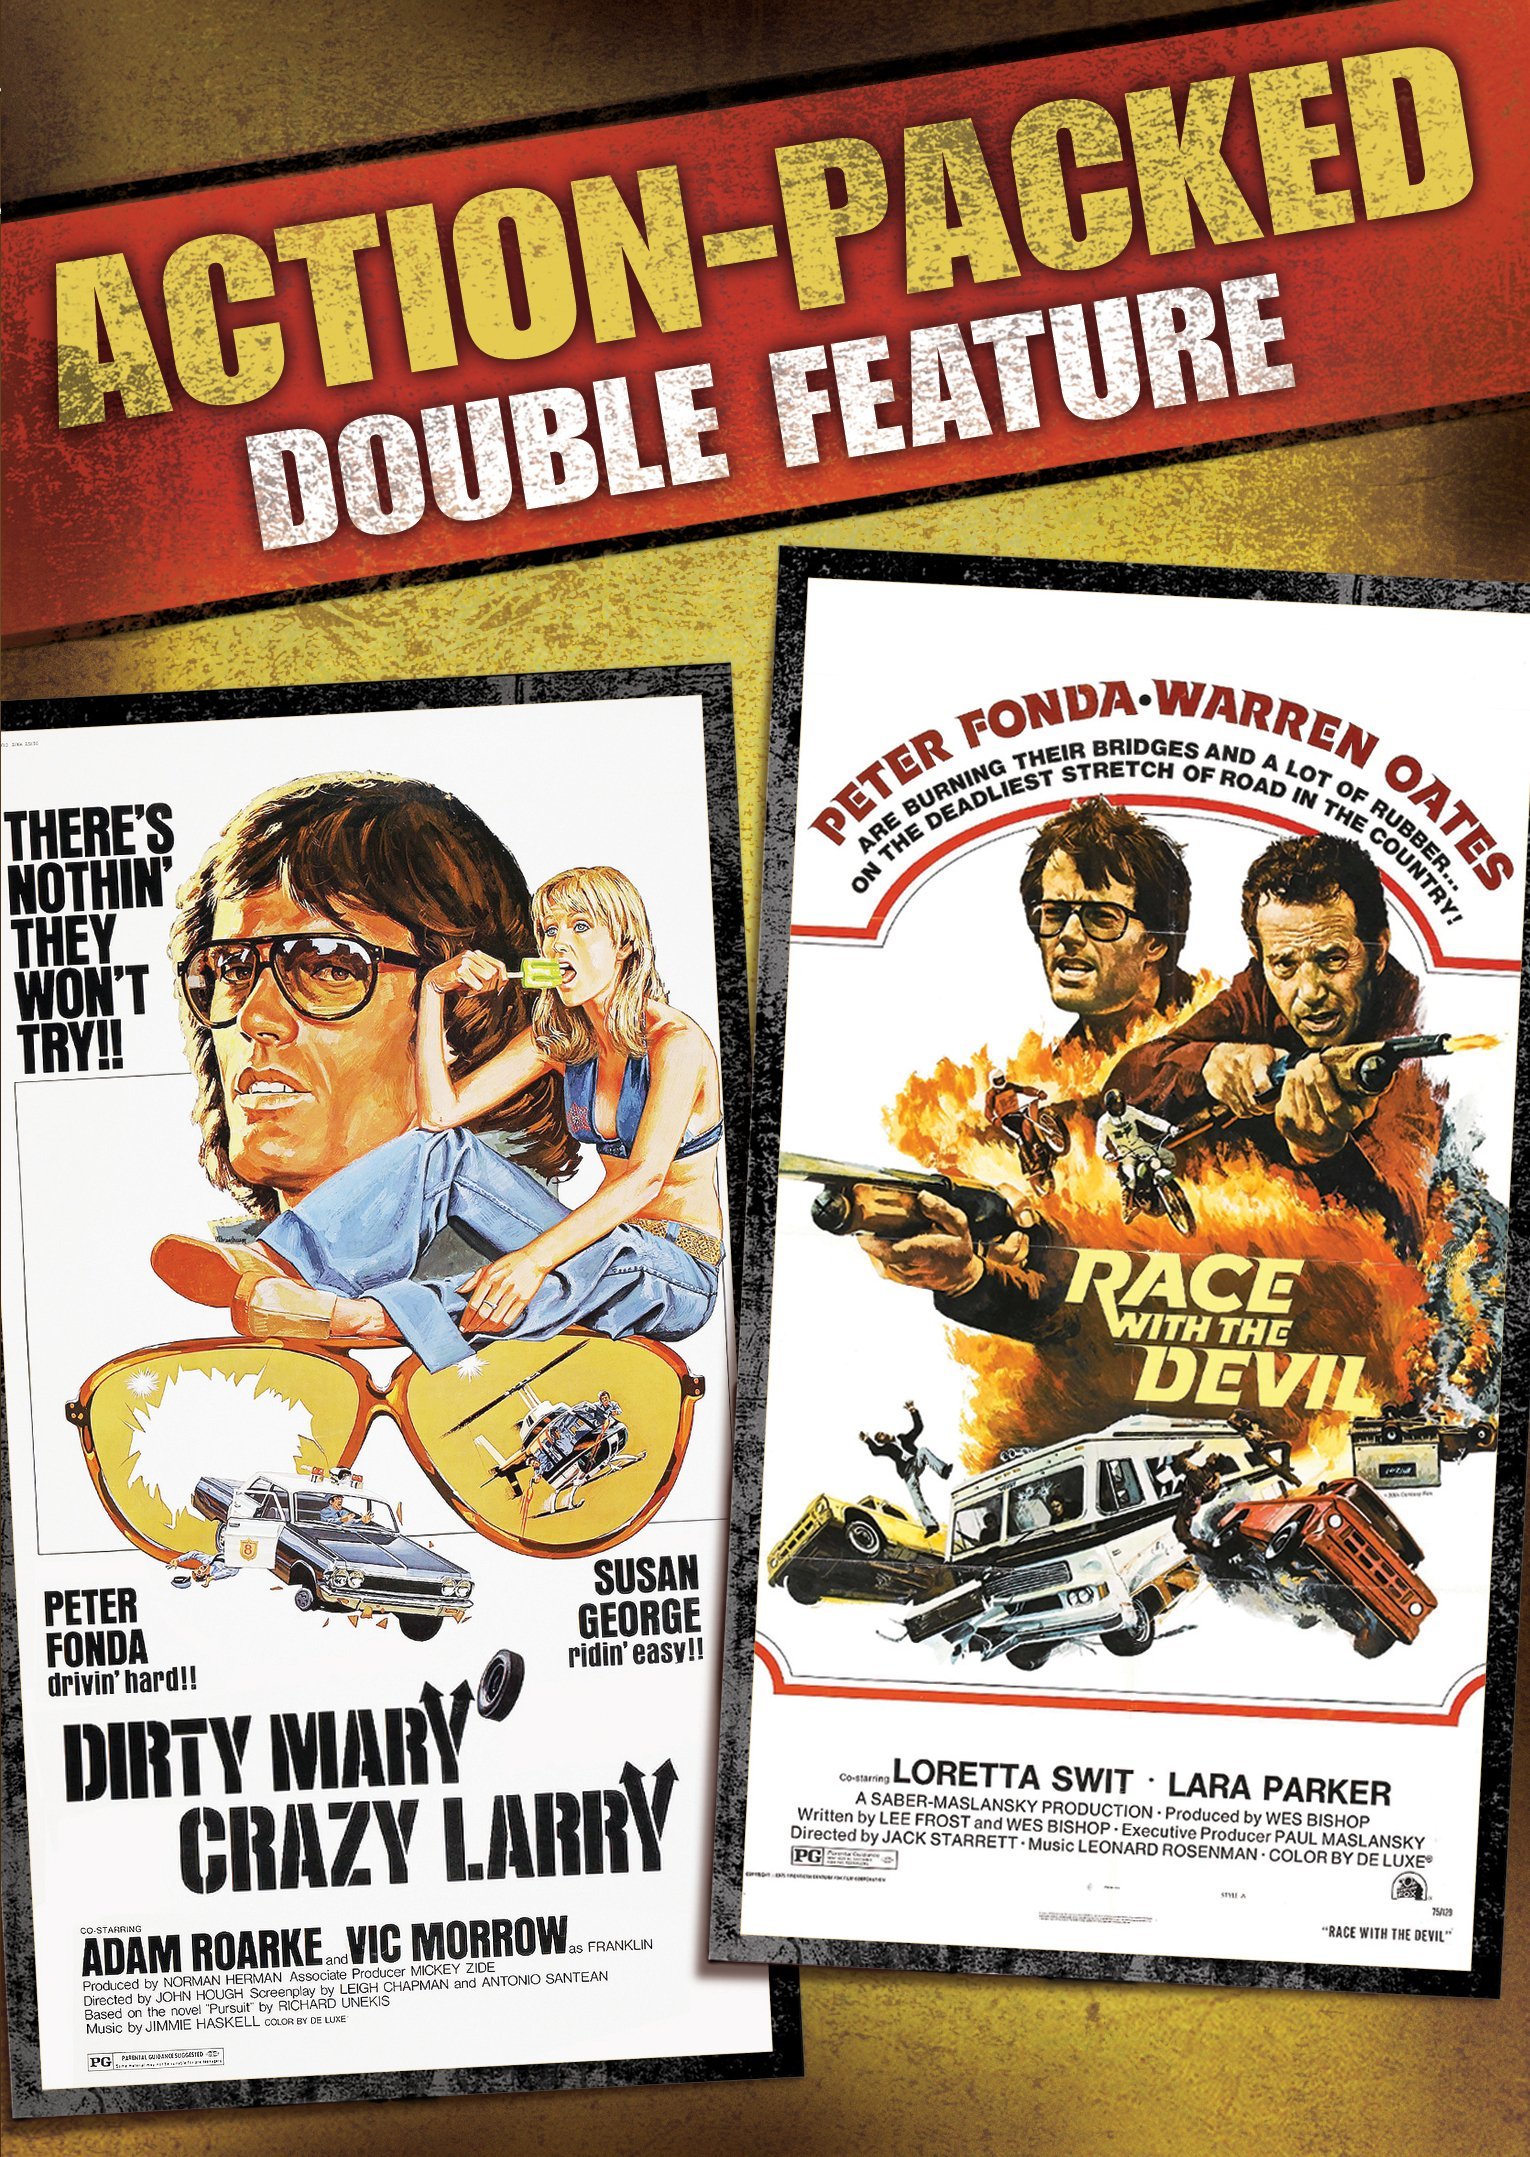 Dirty Mary, Crazy Larry / Race With the Devil (DVD) - image 2 of 2